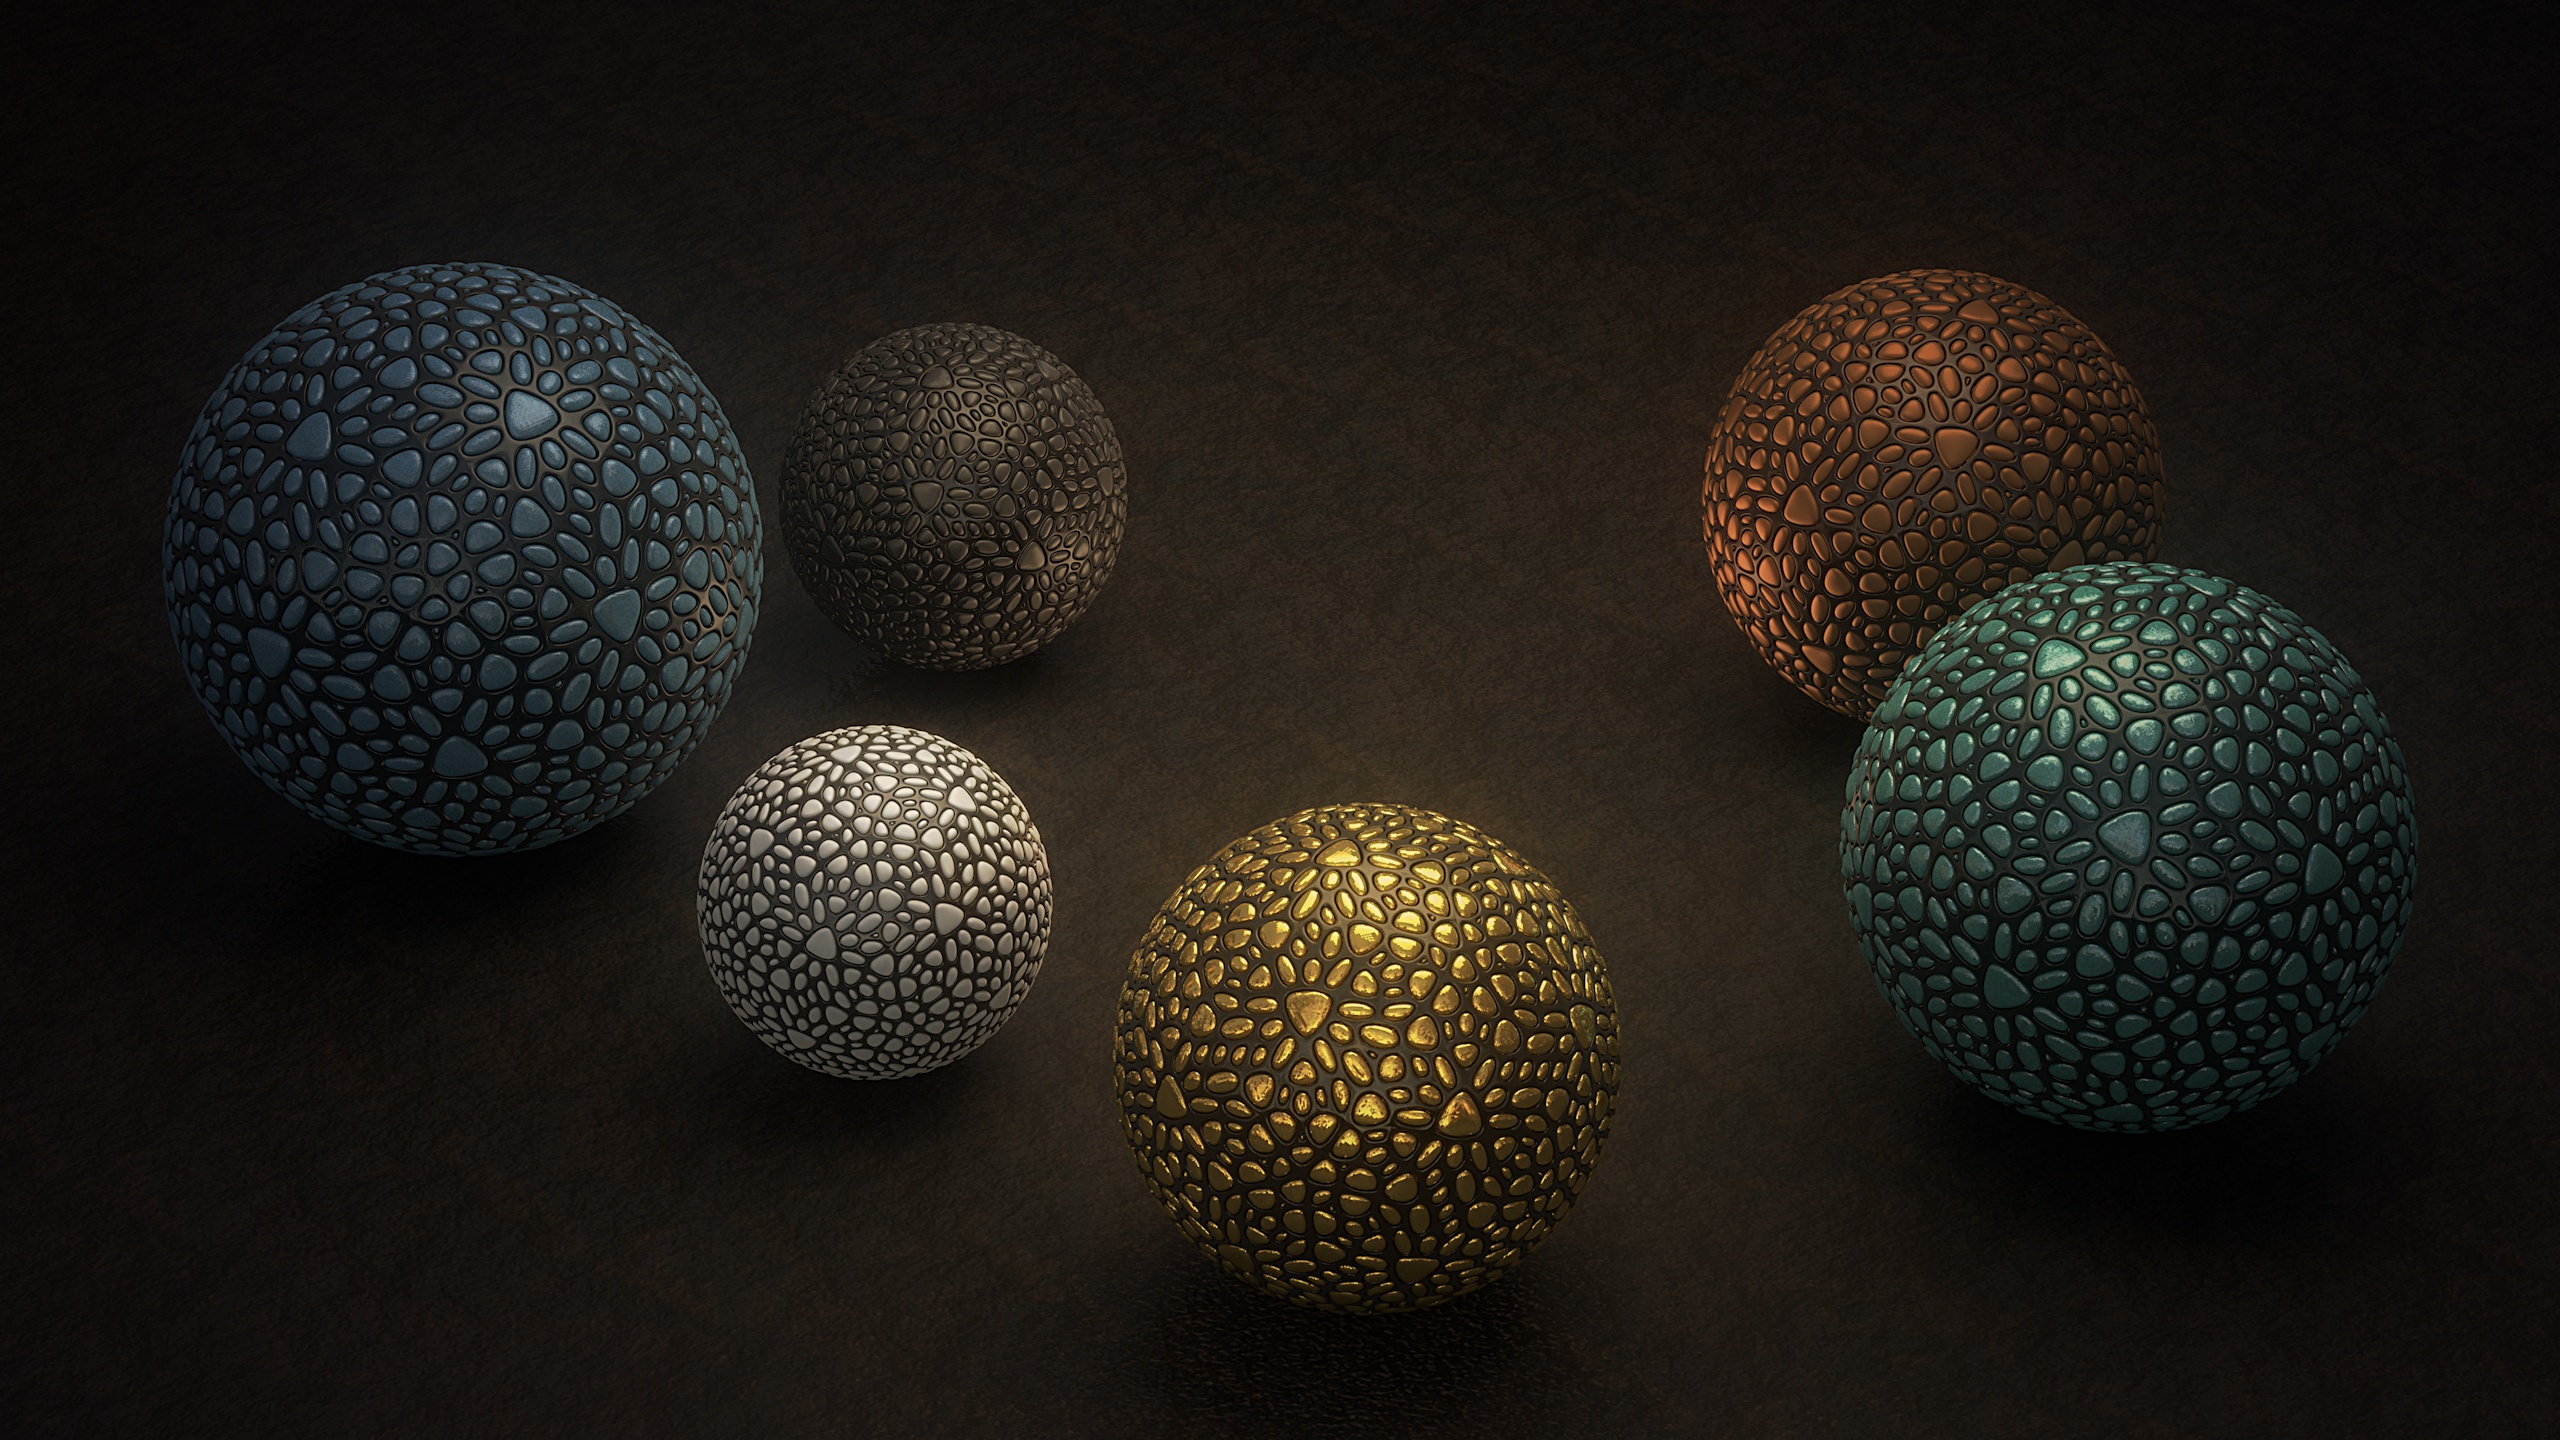 General 2560x1440 digital art abstract 3D Abstract colorful ball sphere texture